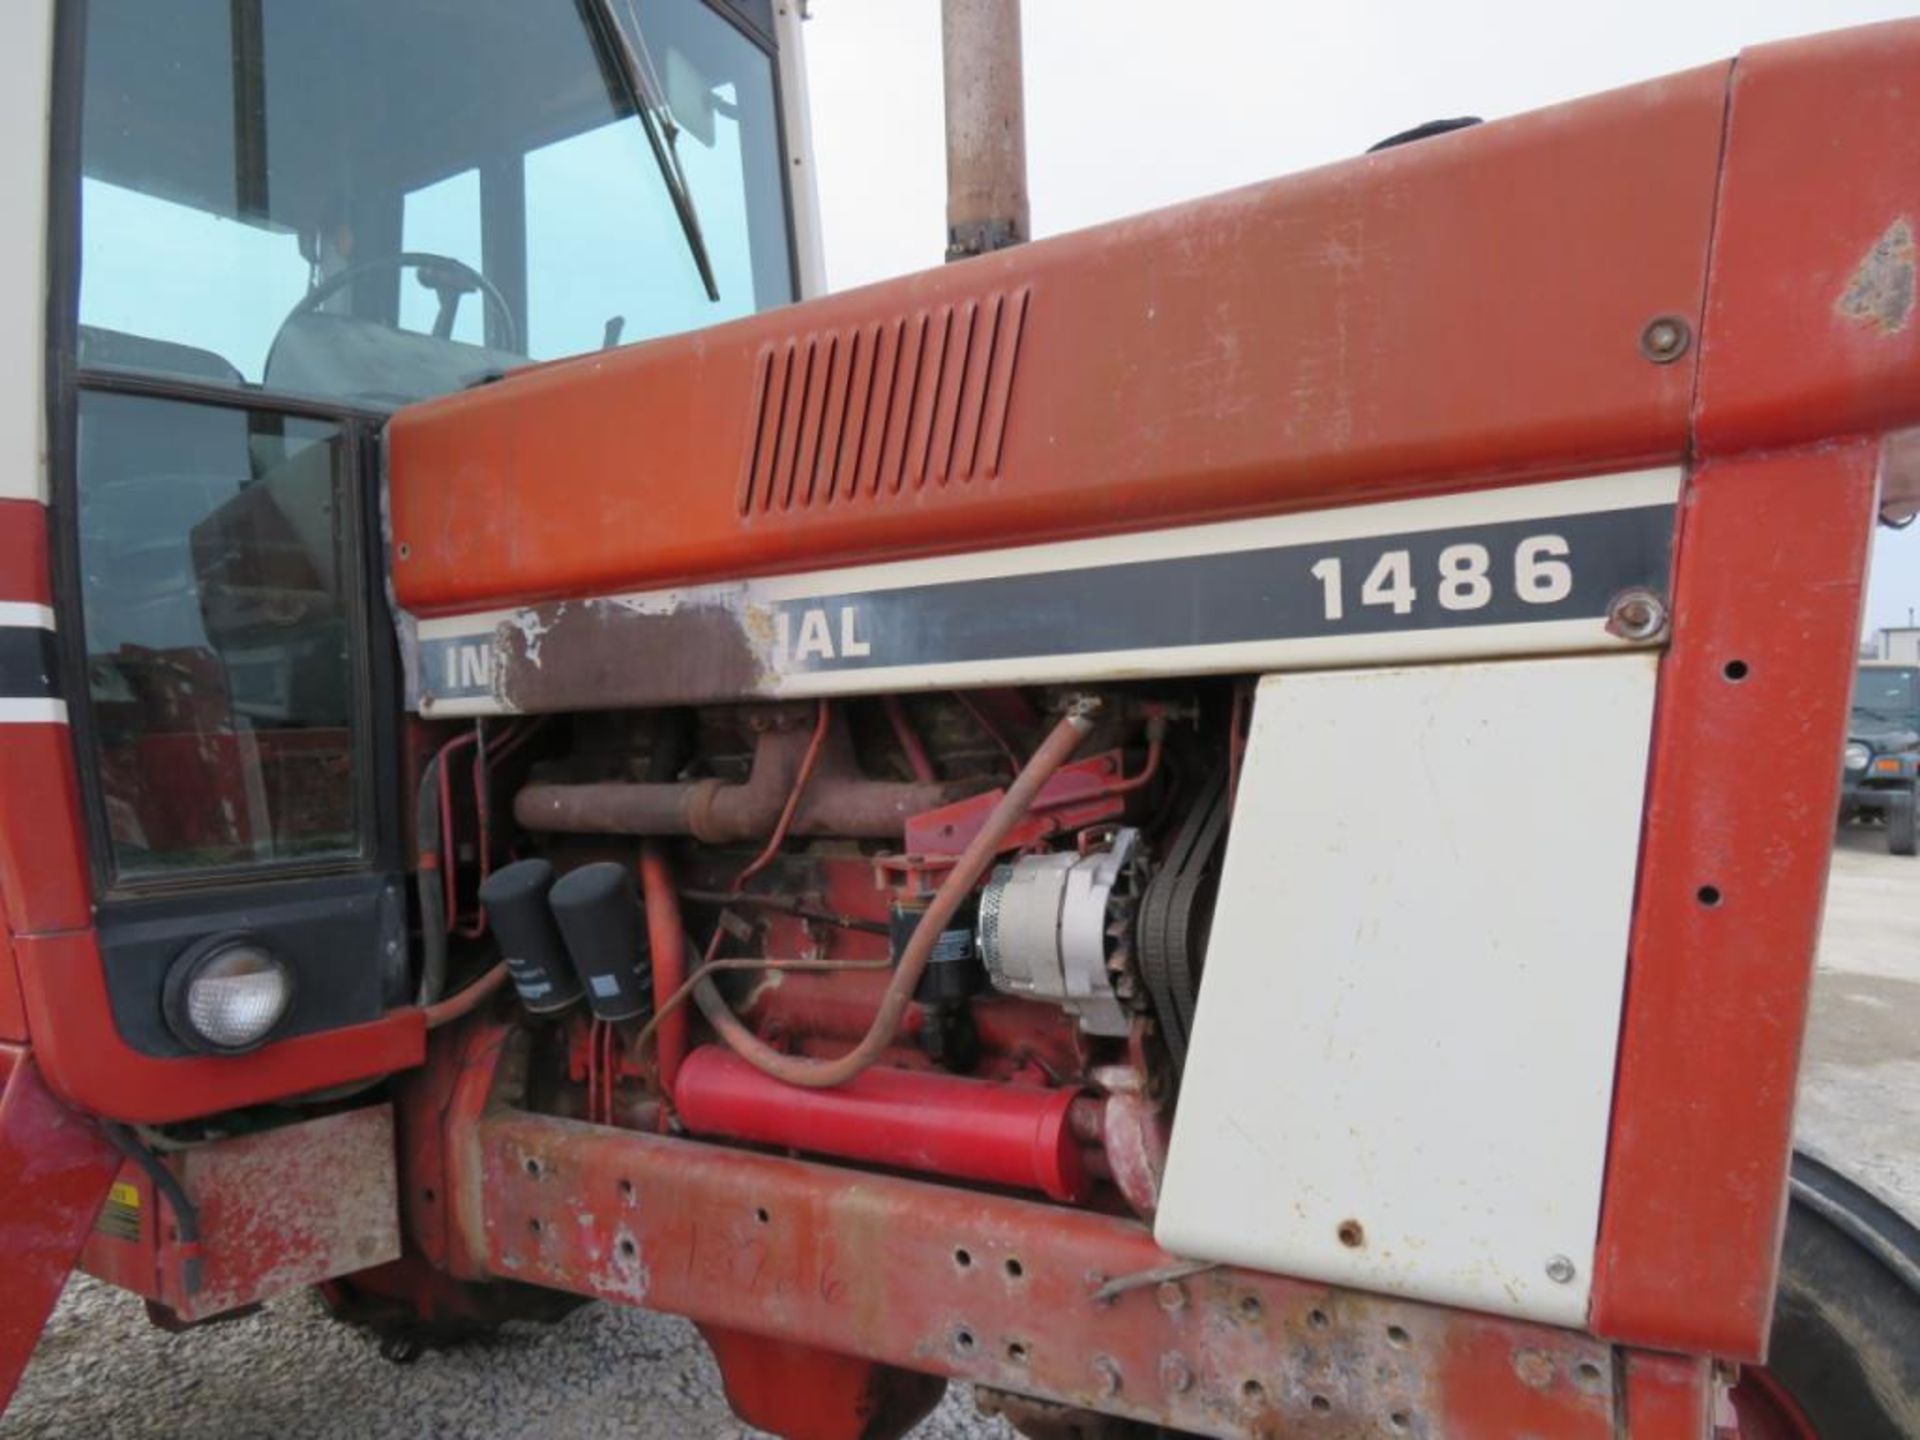 IH 1486 Tractor 16.9 - 35 Duals 30%, Dual PTO, Needs Battery, Interior in rough shape, was used this - Image 5 of 13